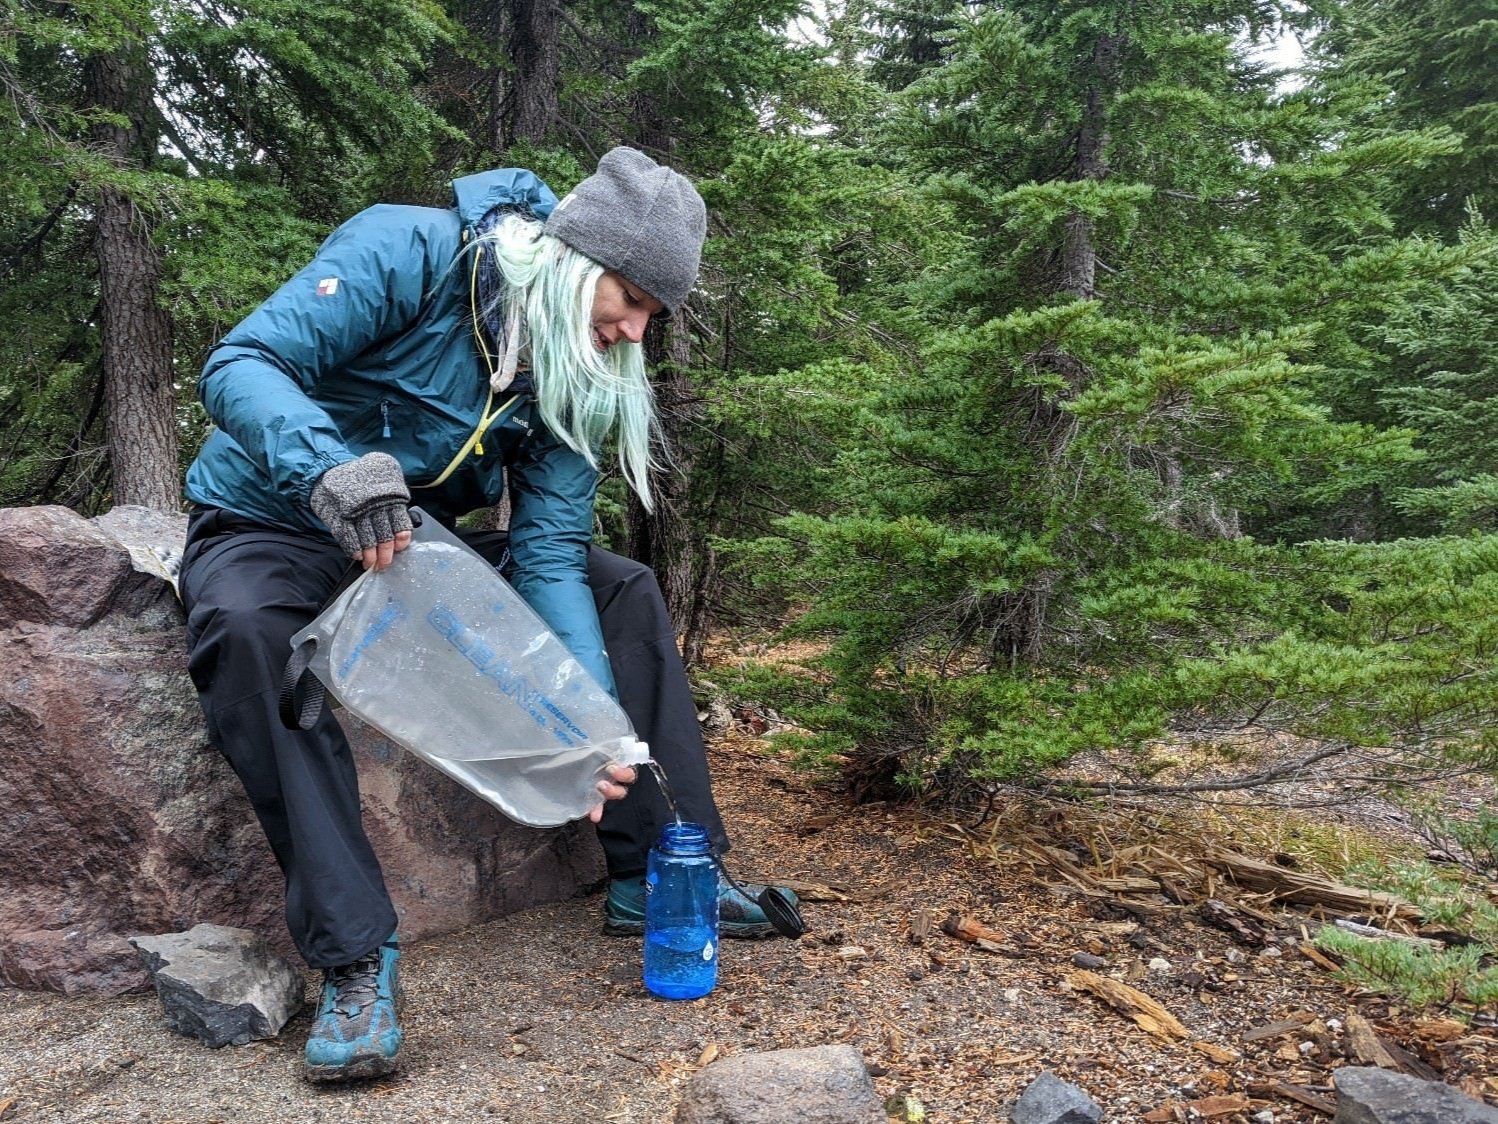 A backpacker pouring water into a water bottle from the clean reservoir of the Platypus GravityWorks Water Filter